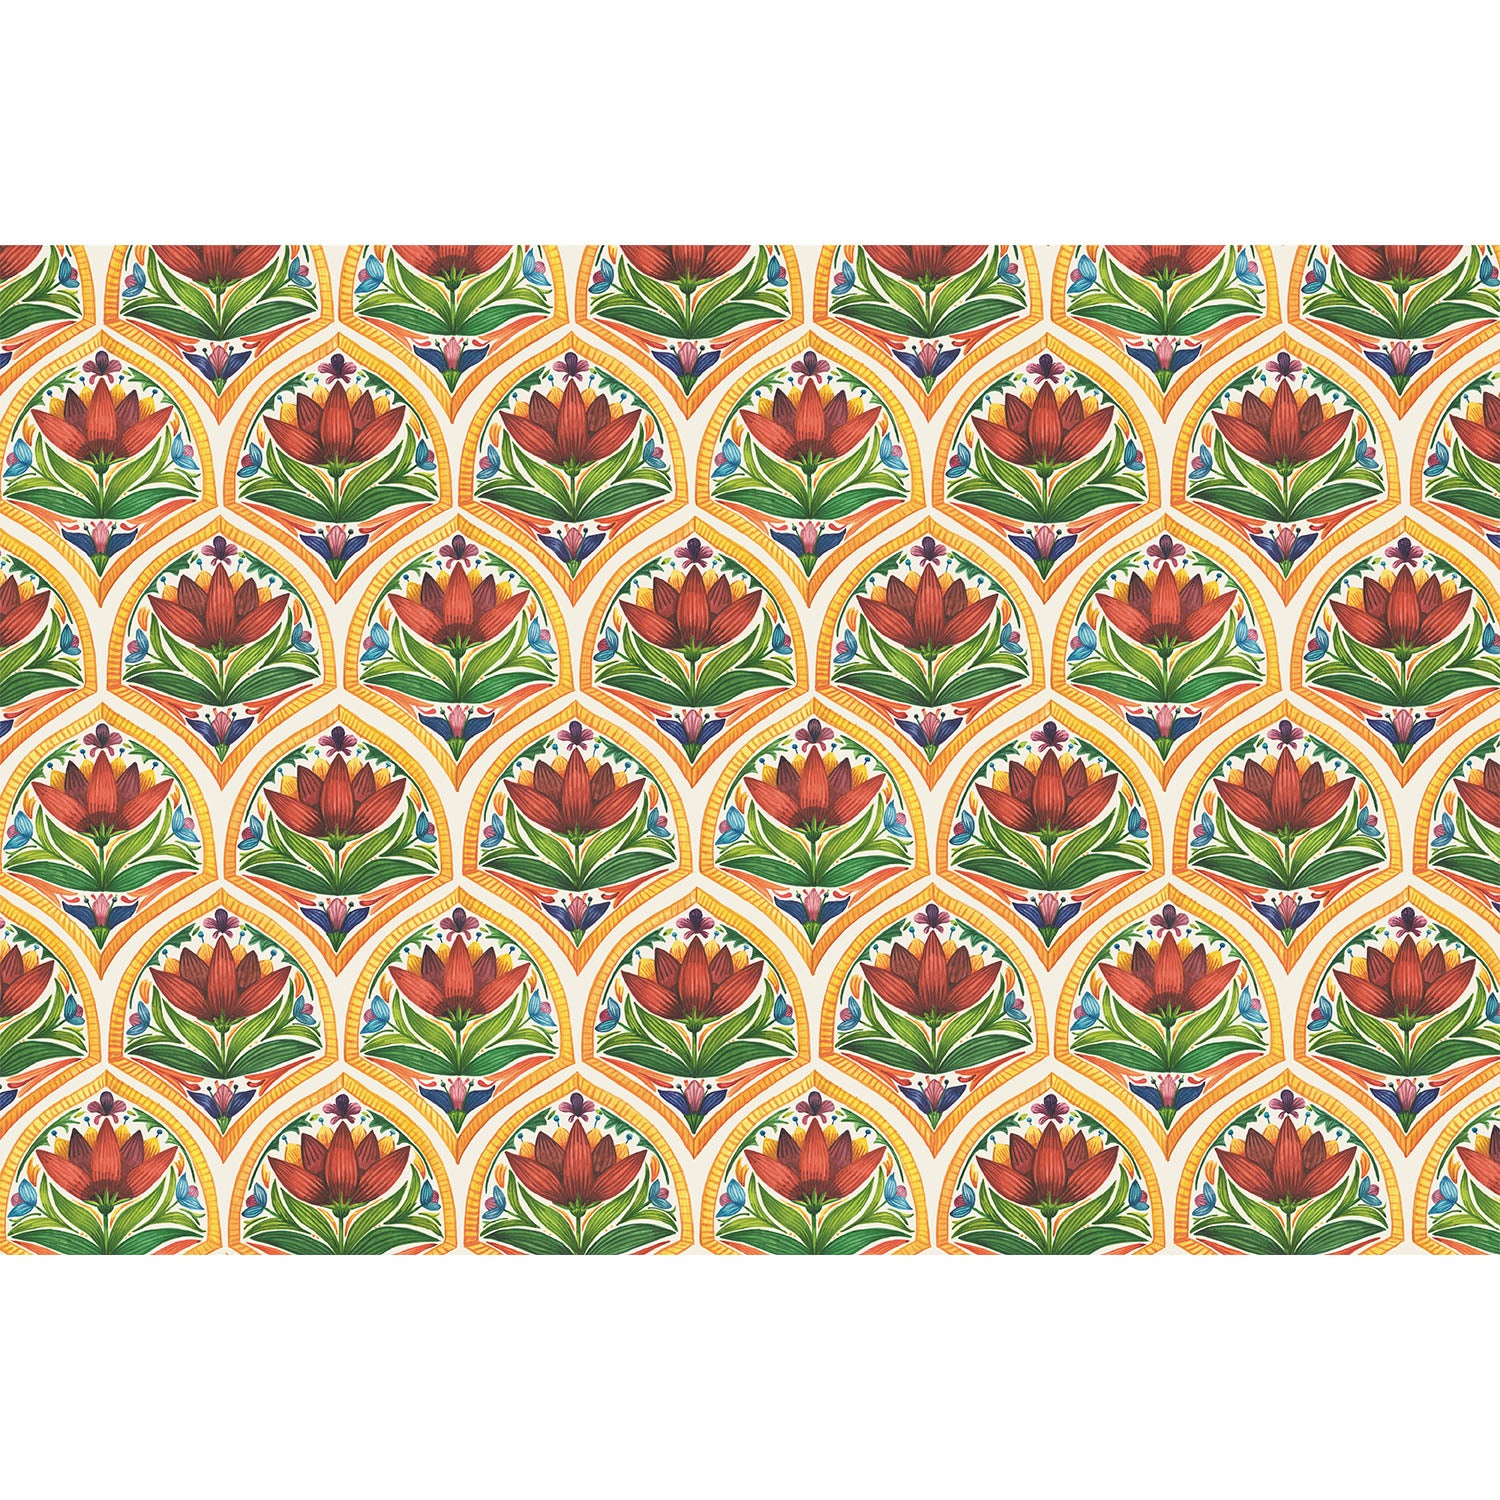 A vibrant, densely-packed illustrated shell-style pattern containing red flowers and green leaves with blue and purple accents in yellow borders, on a white background. 